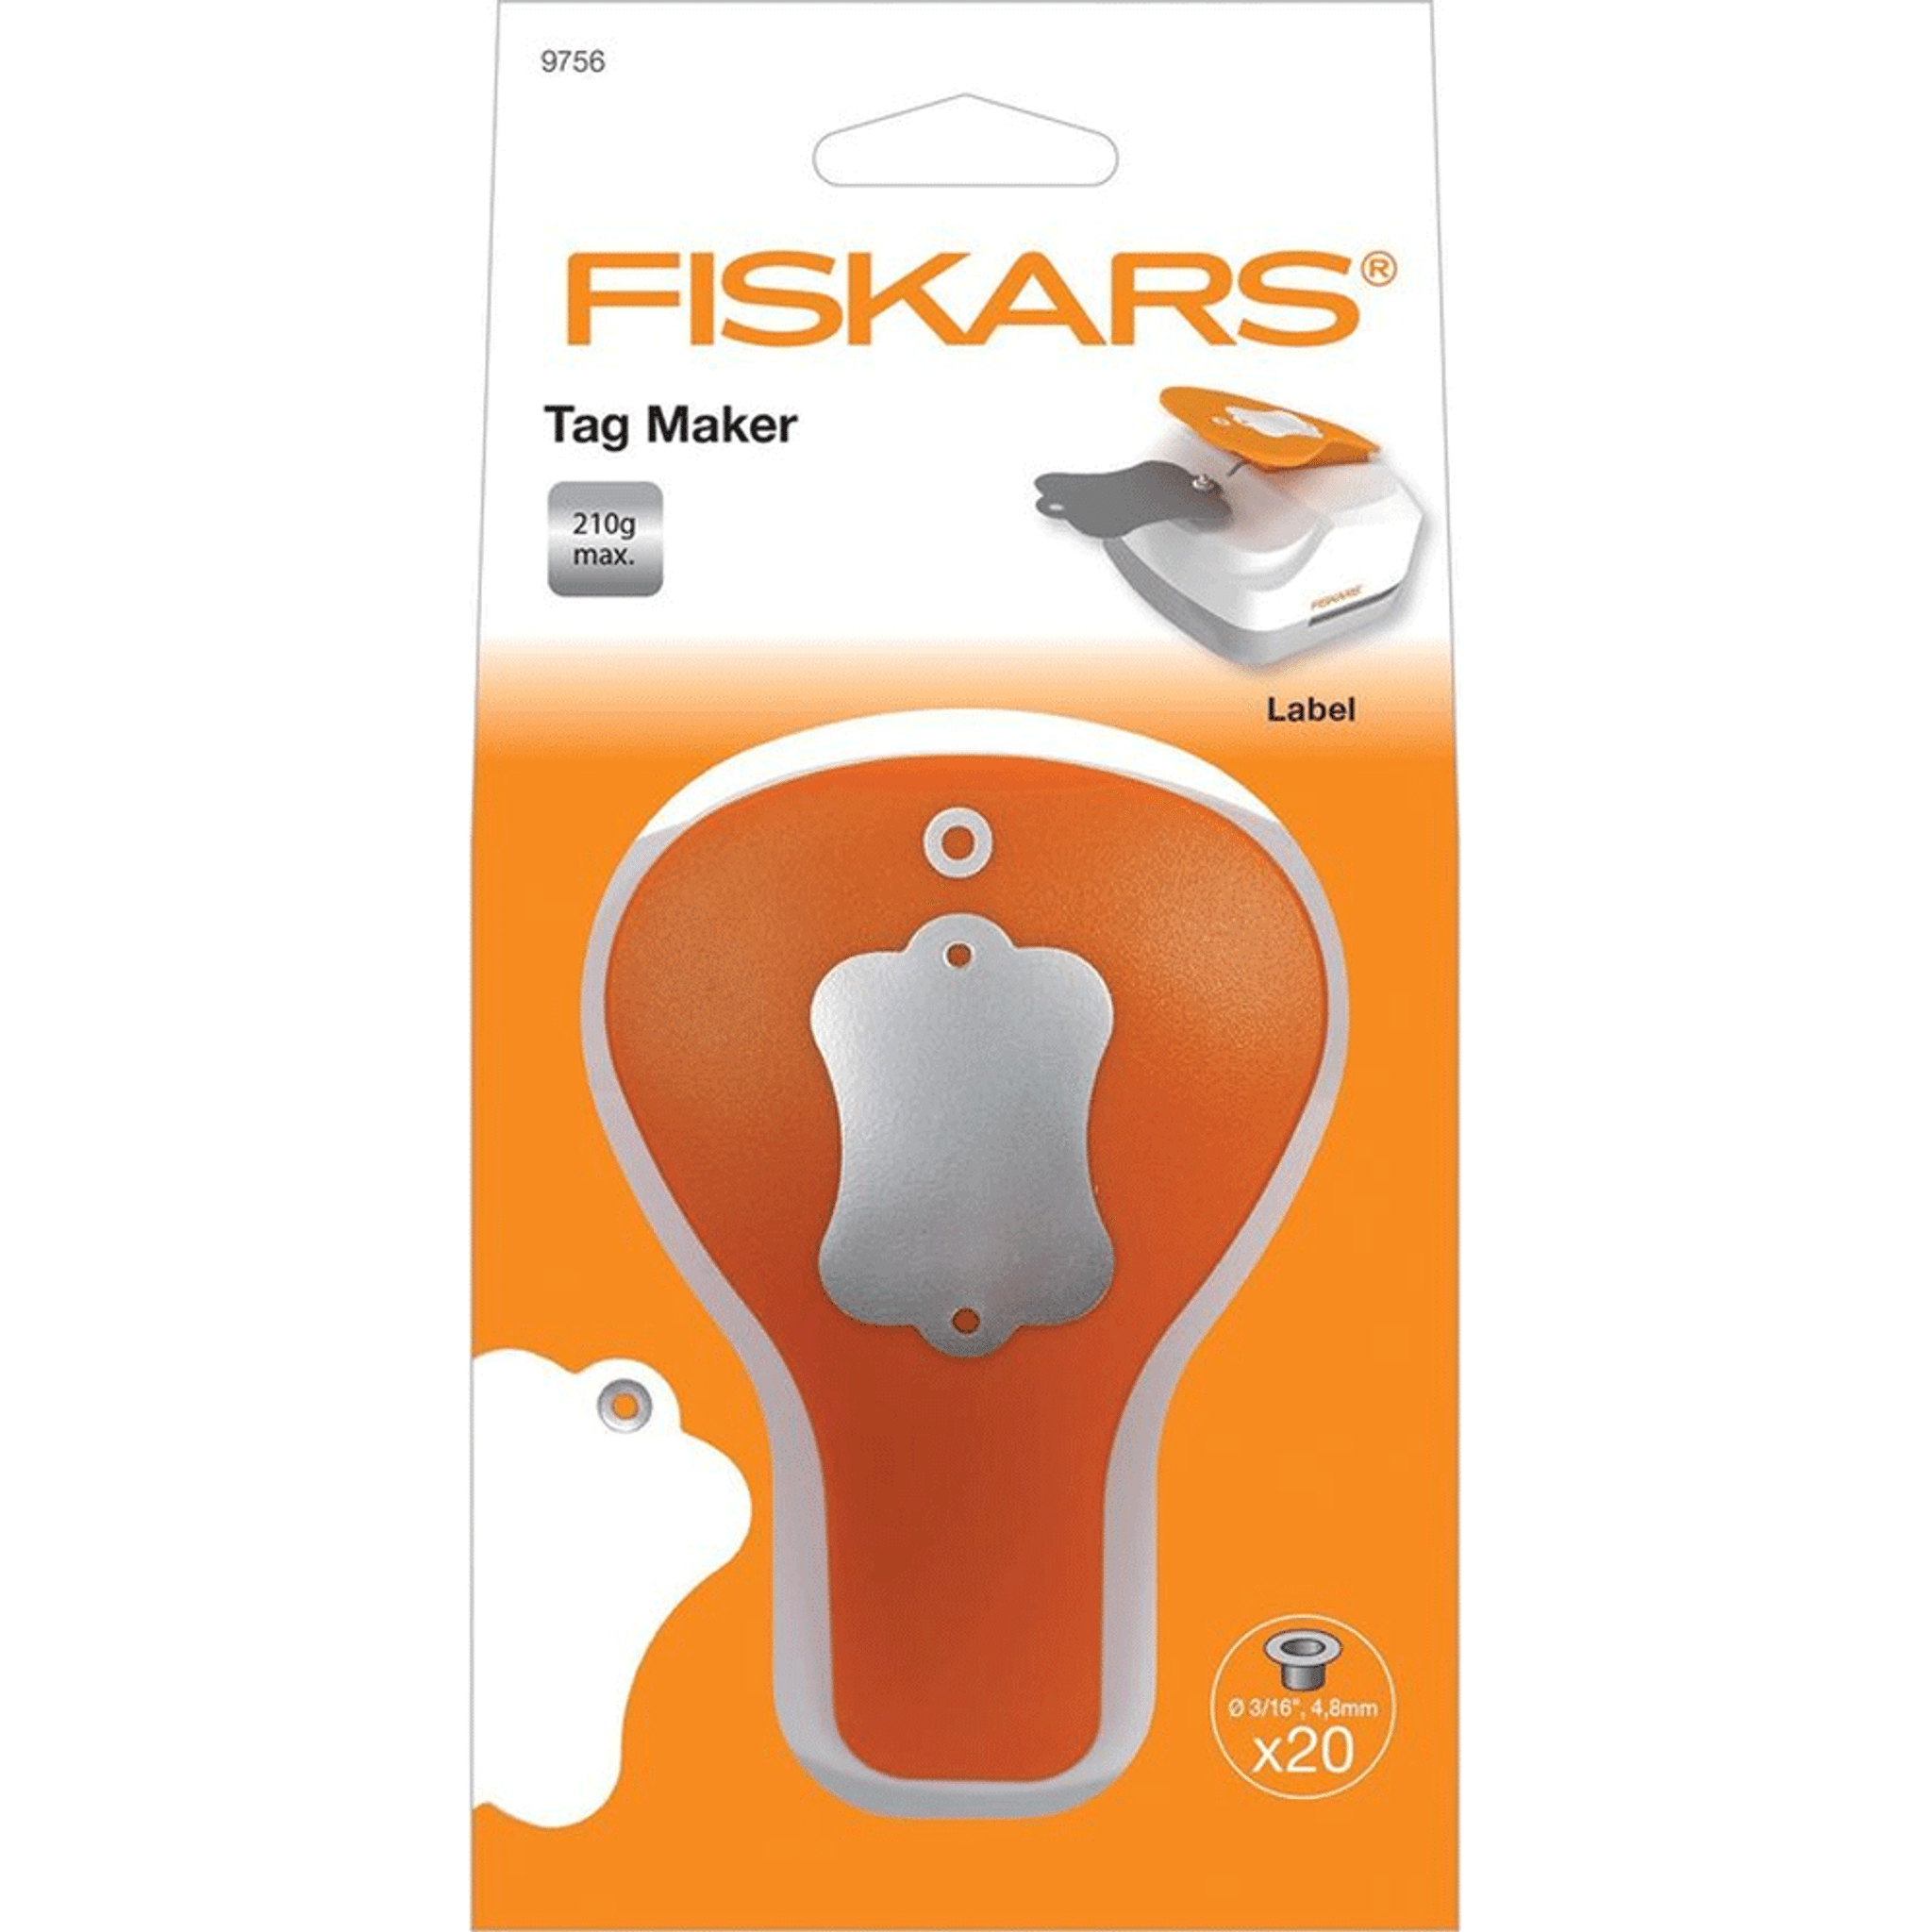 Tag Makers Standard & Scallop 3 in 1 Fiskars punch